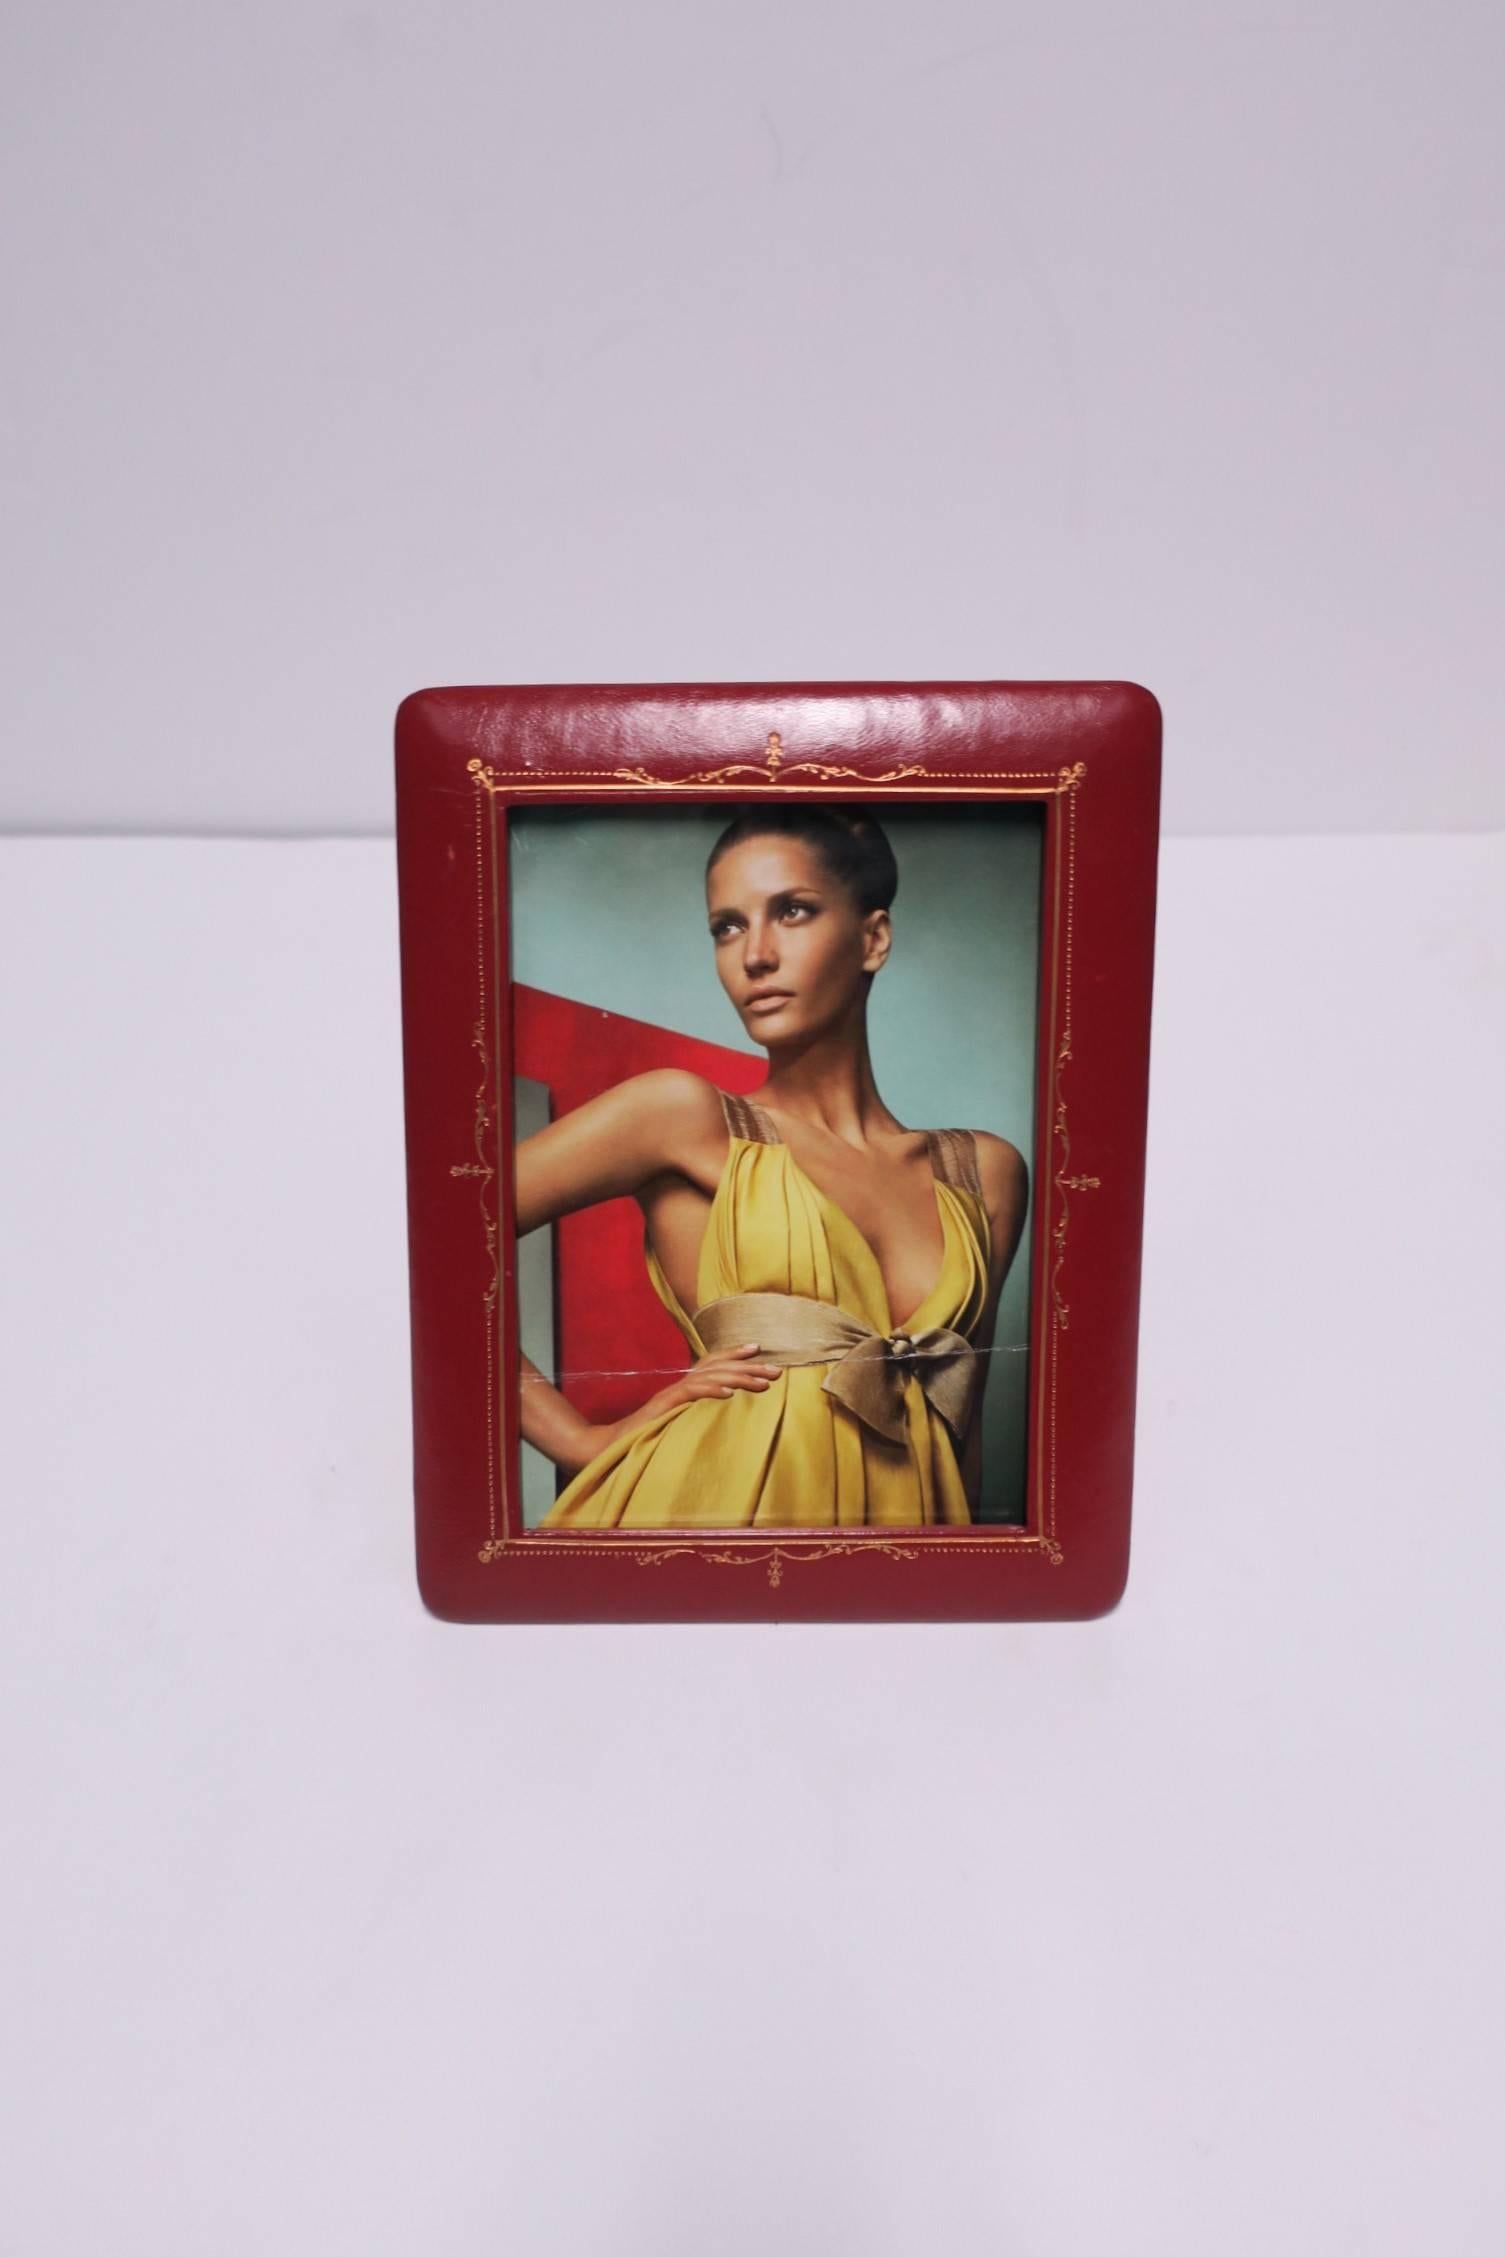 A beautiful vintage Italian red leather picture frame embossed with gold details from Florence, Italy. Maker's mark on back as shown in image. Frame measures 9